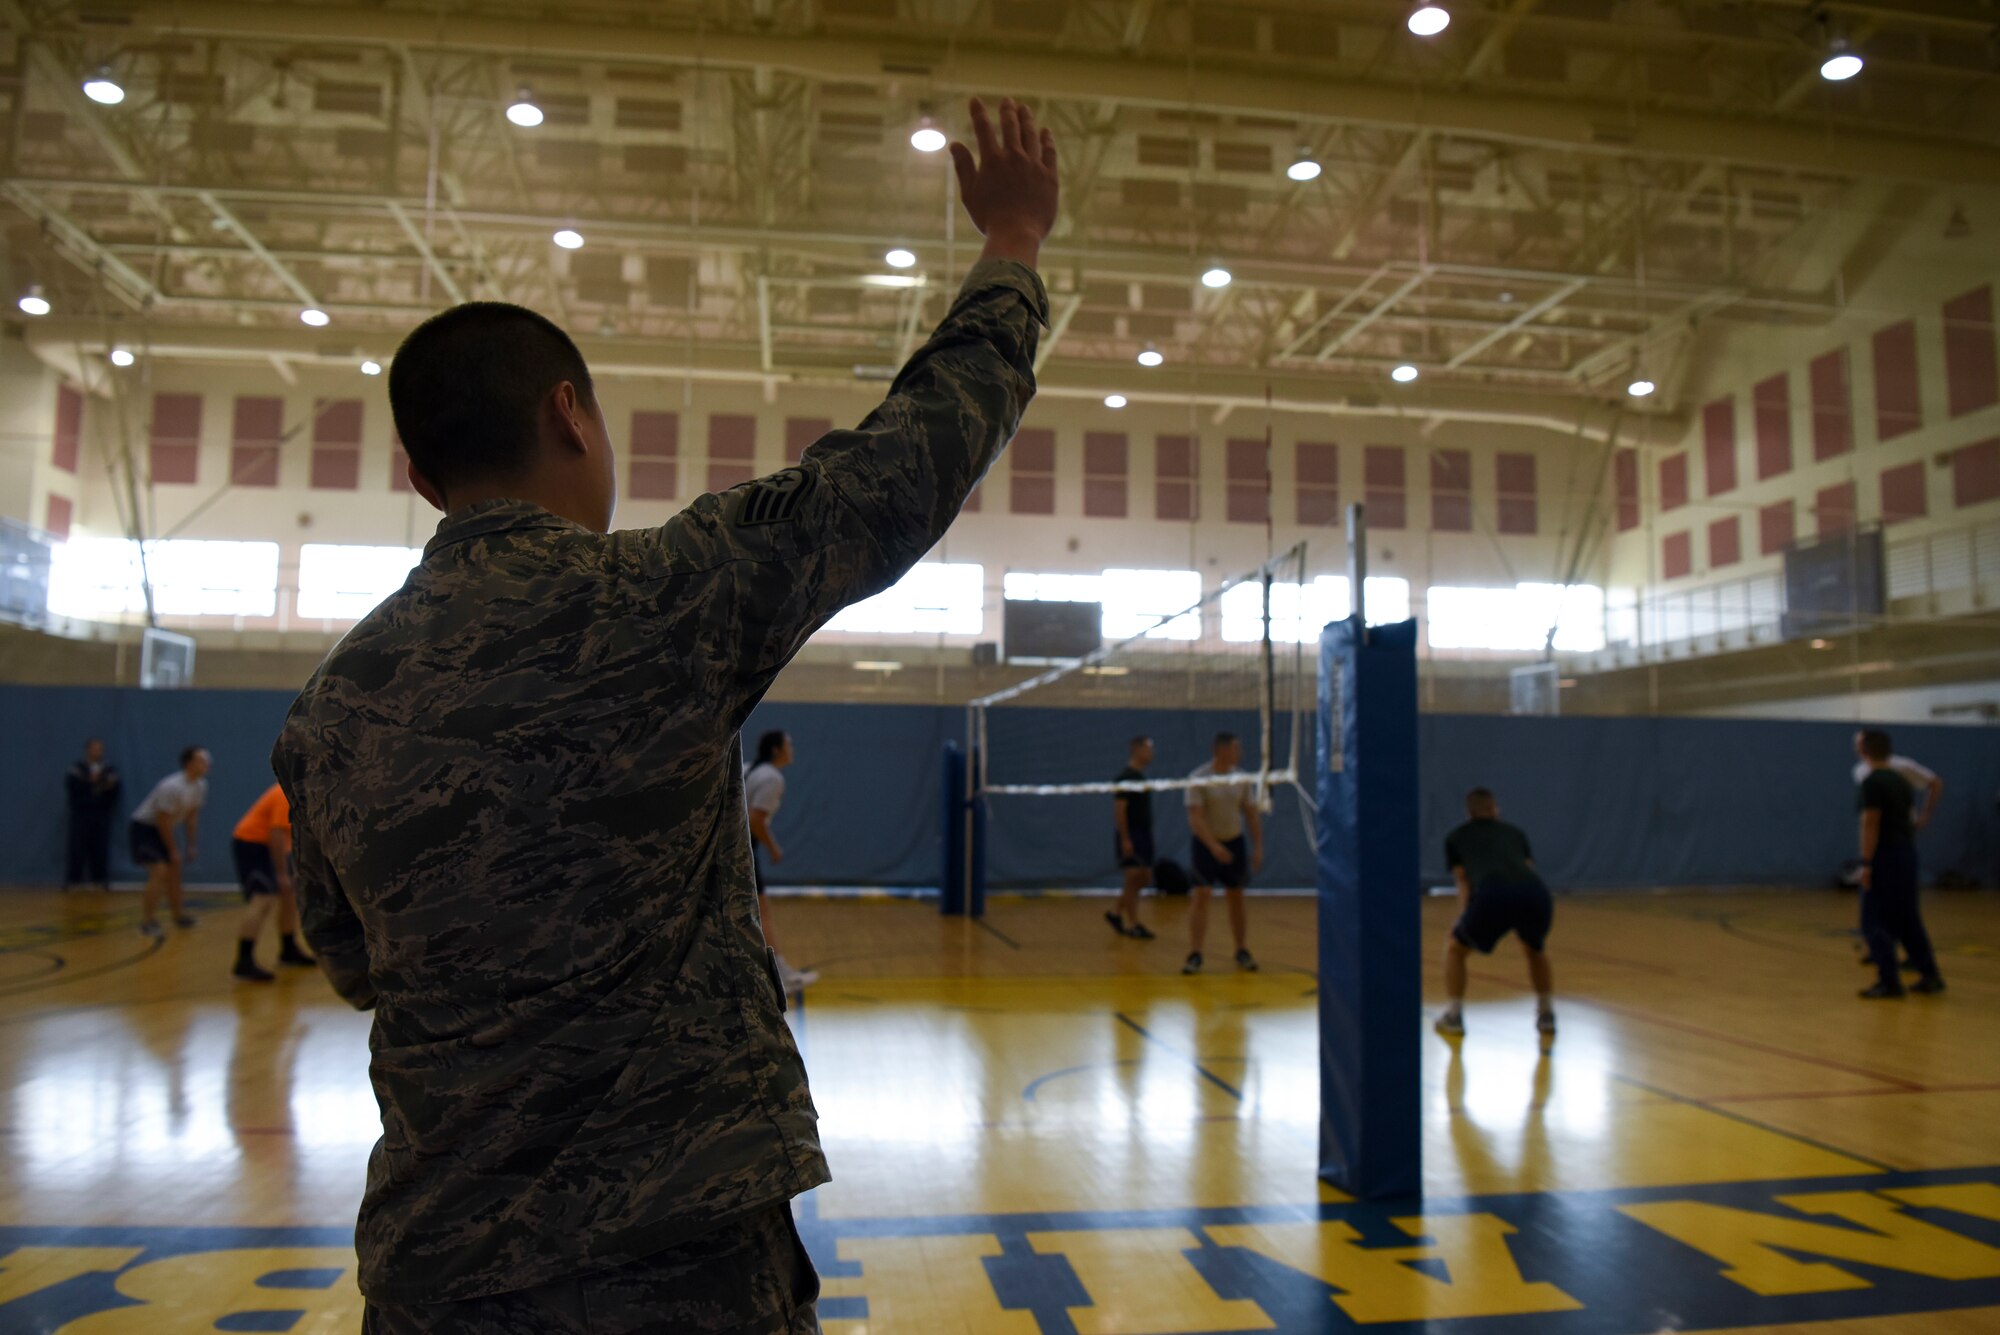 U.S. Air Force Staff Sgt. Bach Nguyen, 8th Maintenance Squadron structural maintainer, referees a volleyball game during the 2018 US-ROKAF Friendship Day at Kunsan Air Base, Republic of Korea, Nov. 9, 2018. Participants competed in a variety of sports and interactive events, such as basketball, volleyball, League of Legends, golf, bowling, and soccer. (U.S. Air Force photo by Senior Airman Savannah L. Waters)